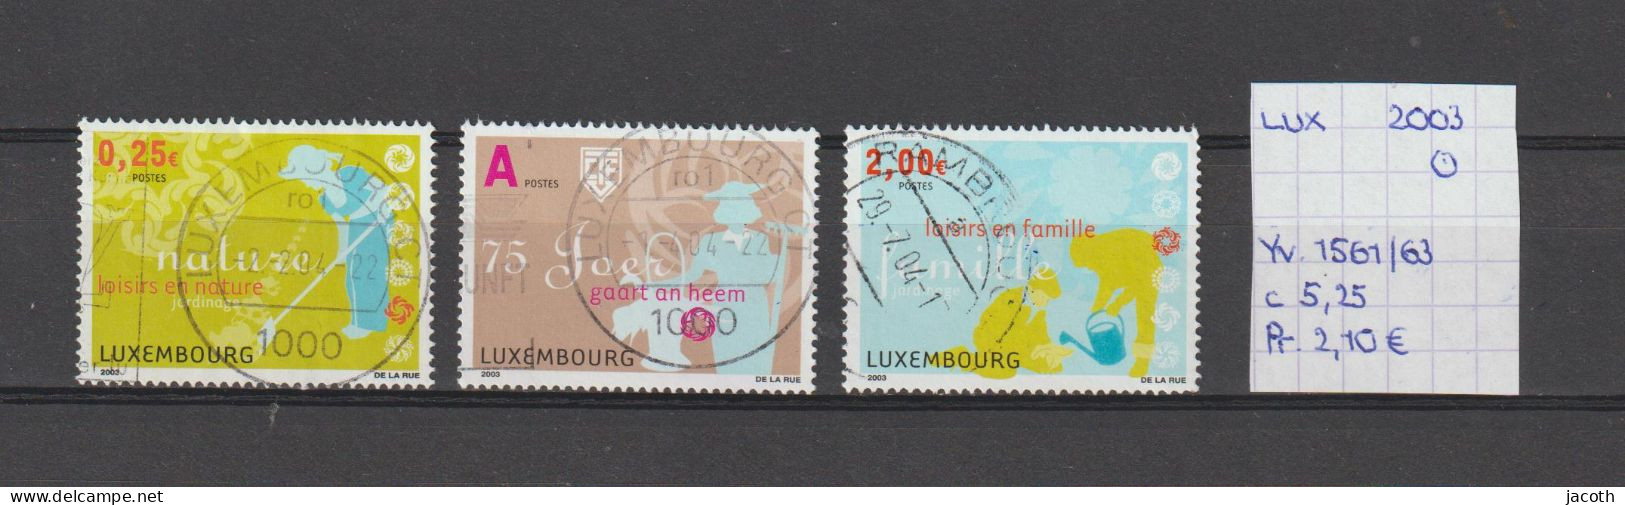 (TJ) Luxembourg 2003 - YT 1561/63 (gest./obl./used) - Gebraucht